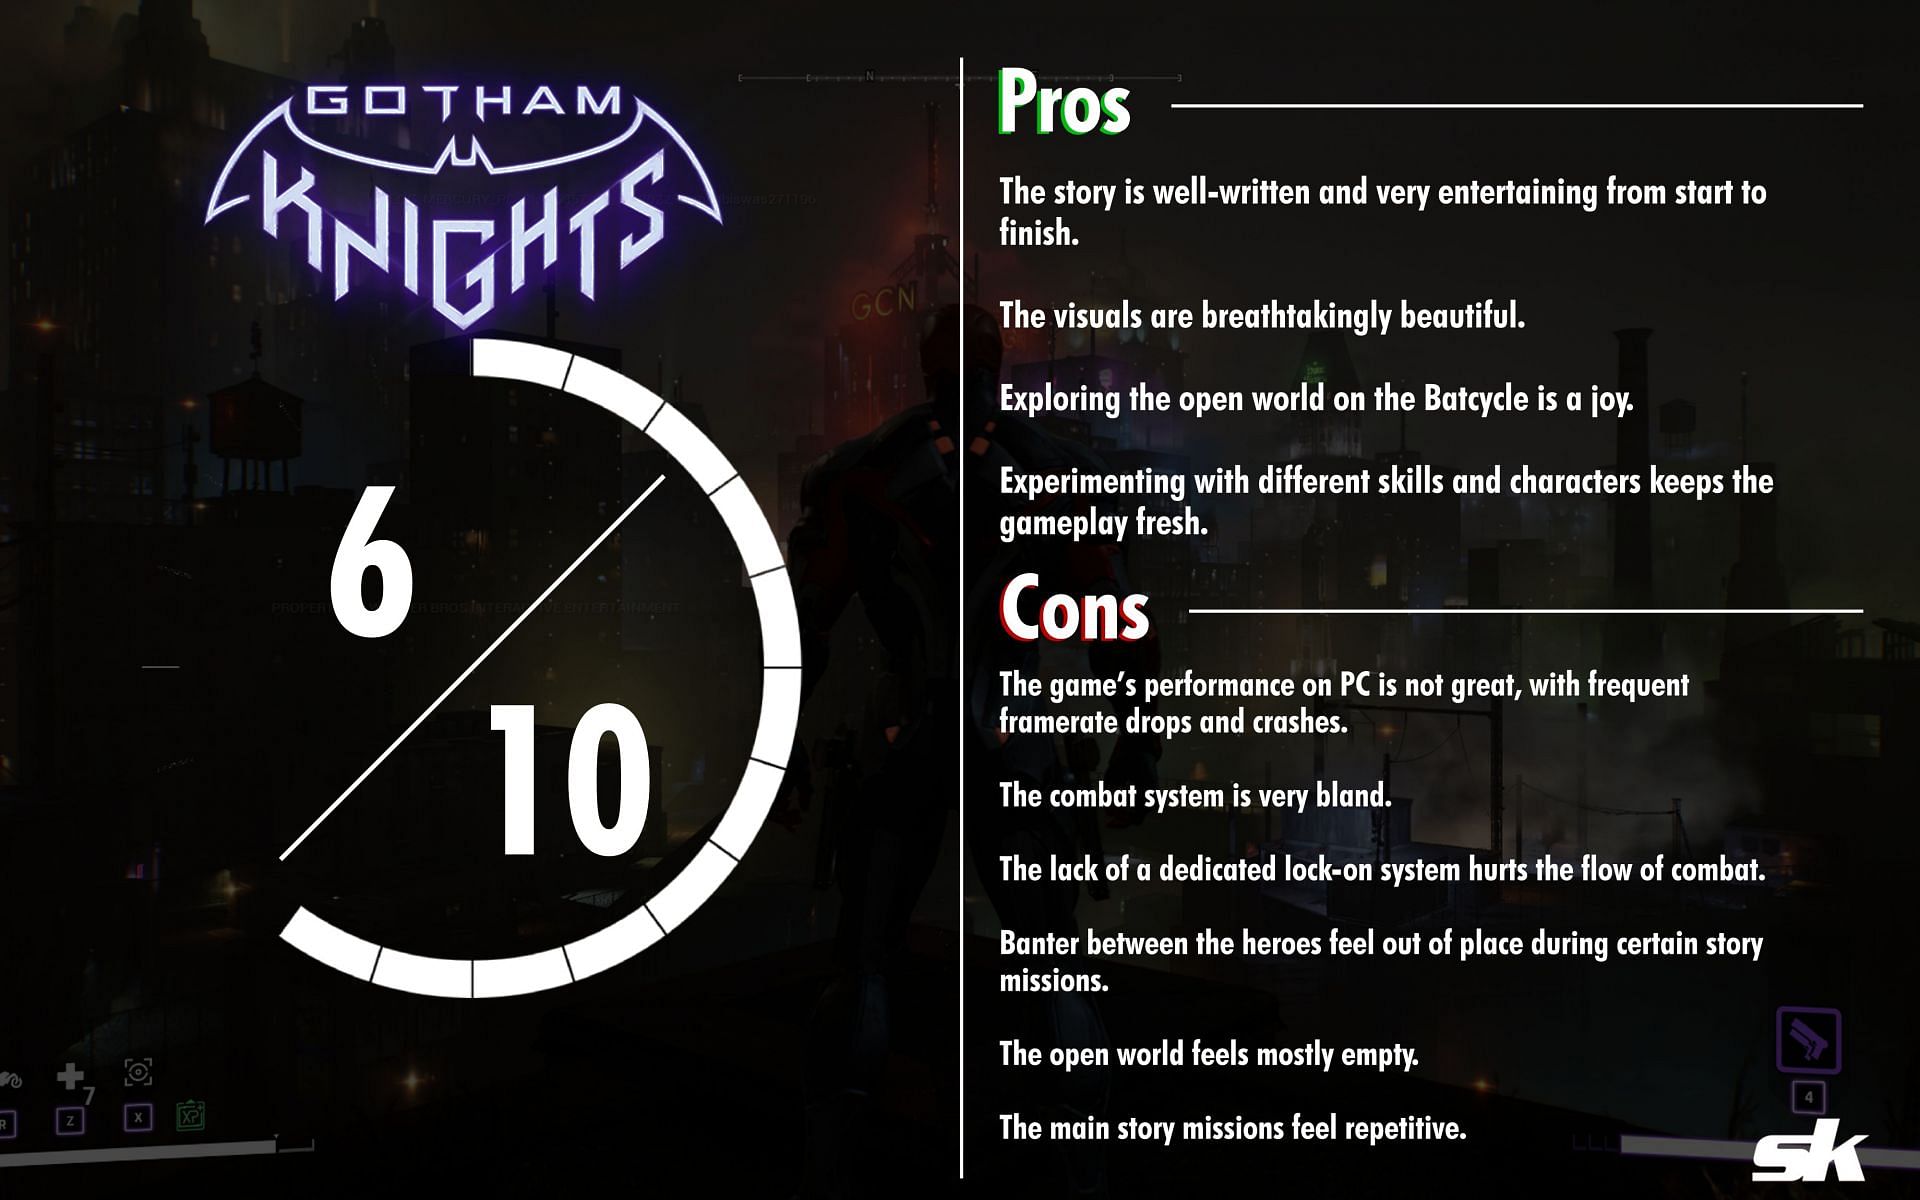 Review: 'Gotham Knights' has some bright spots, but doesn't carry torch to  'Arkham' video game legacy